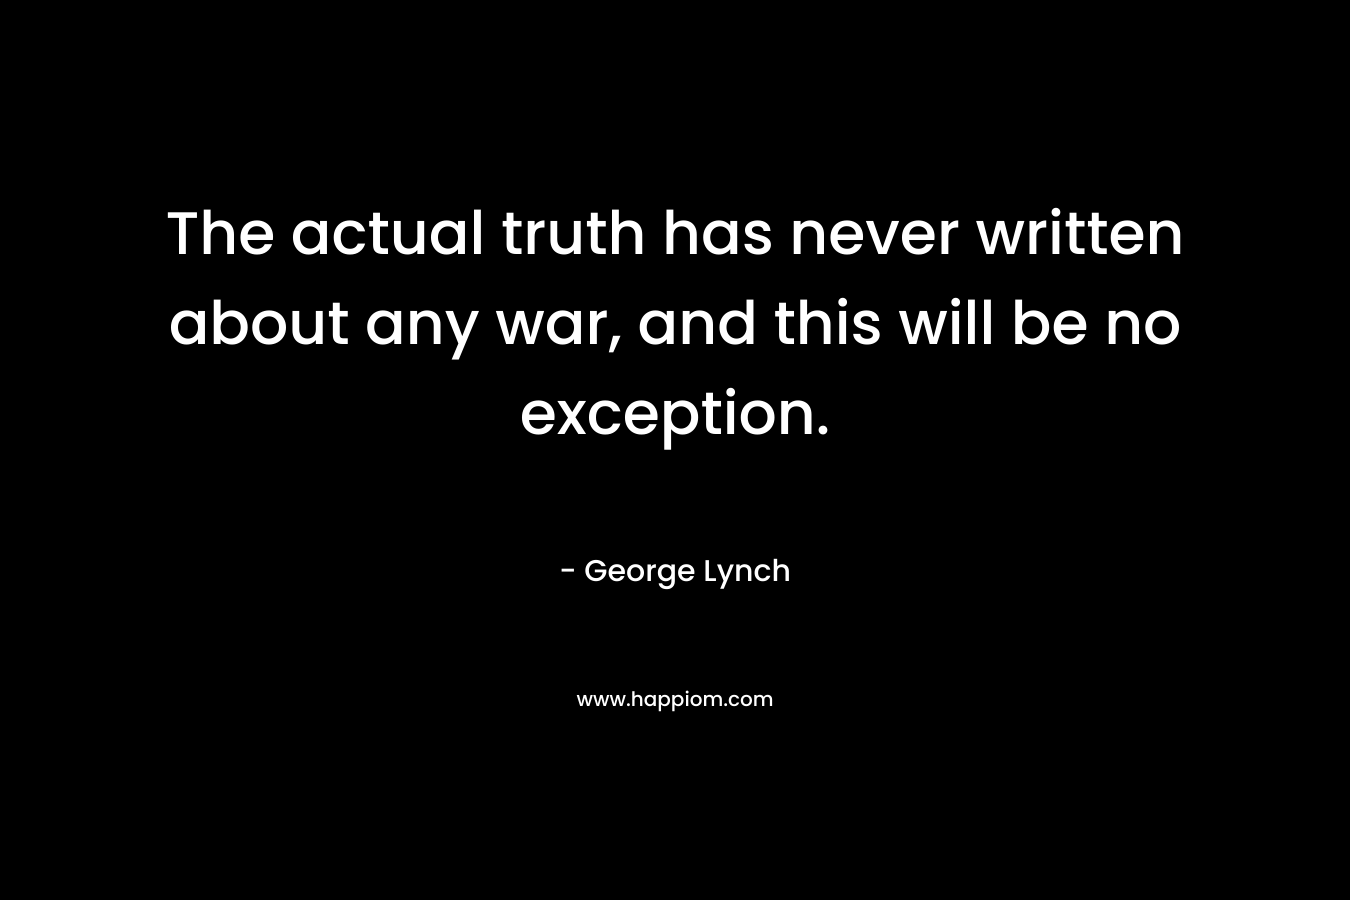 The actual truth has never written about any war, and this will be no exception.